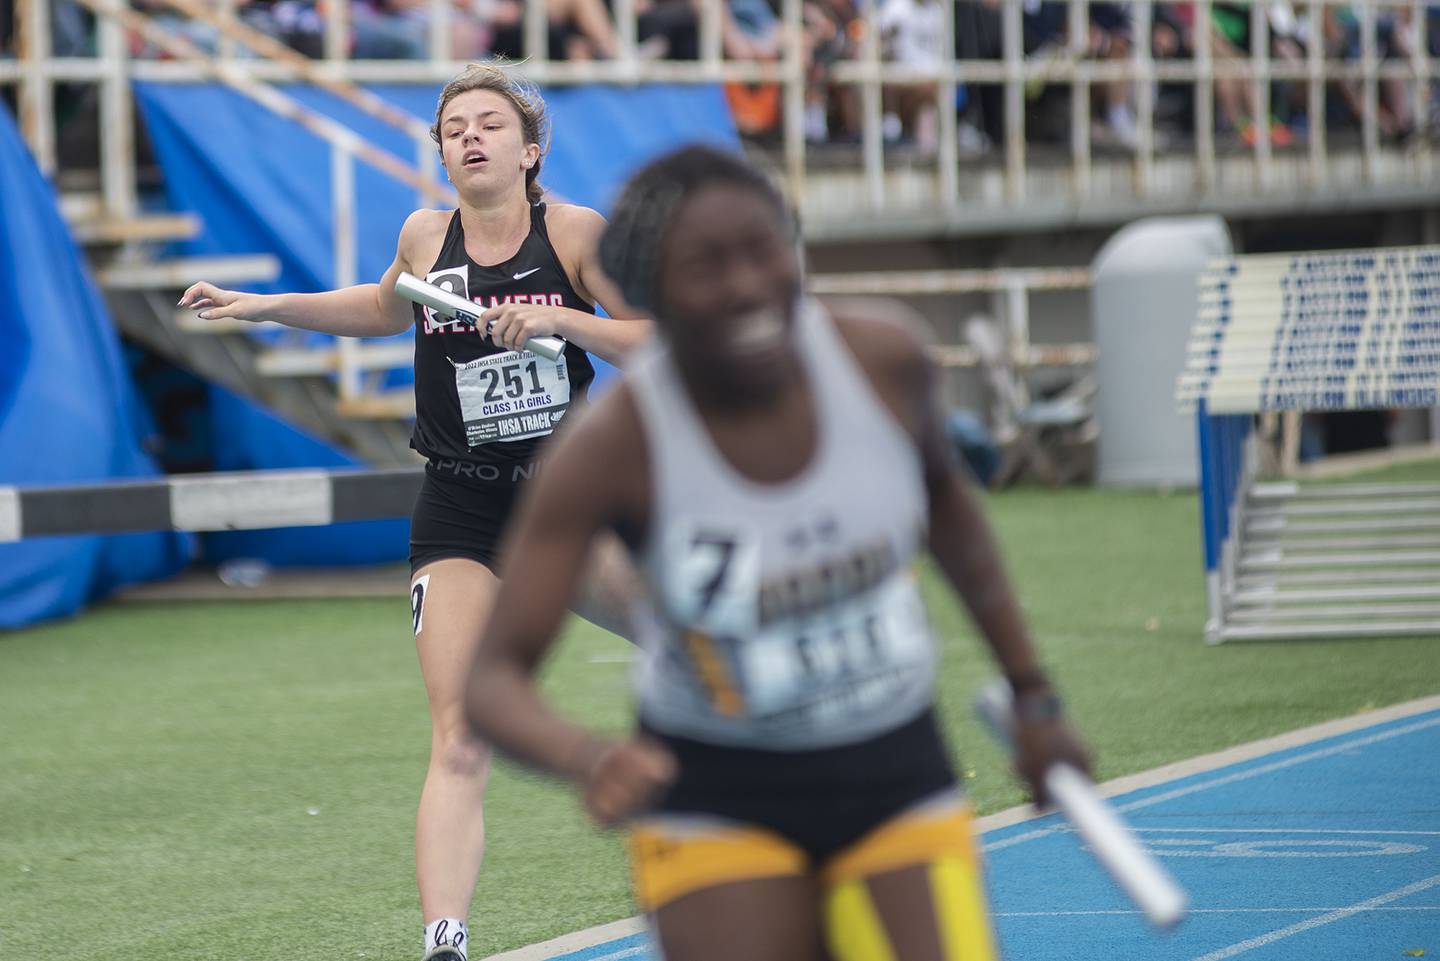 Fulton's Lauren Mahoney competes in the 1A 4x2 finals during the IHSA girls state championships, Saturday, May 21, 2022 in Charleston.